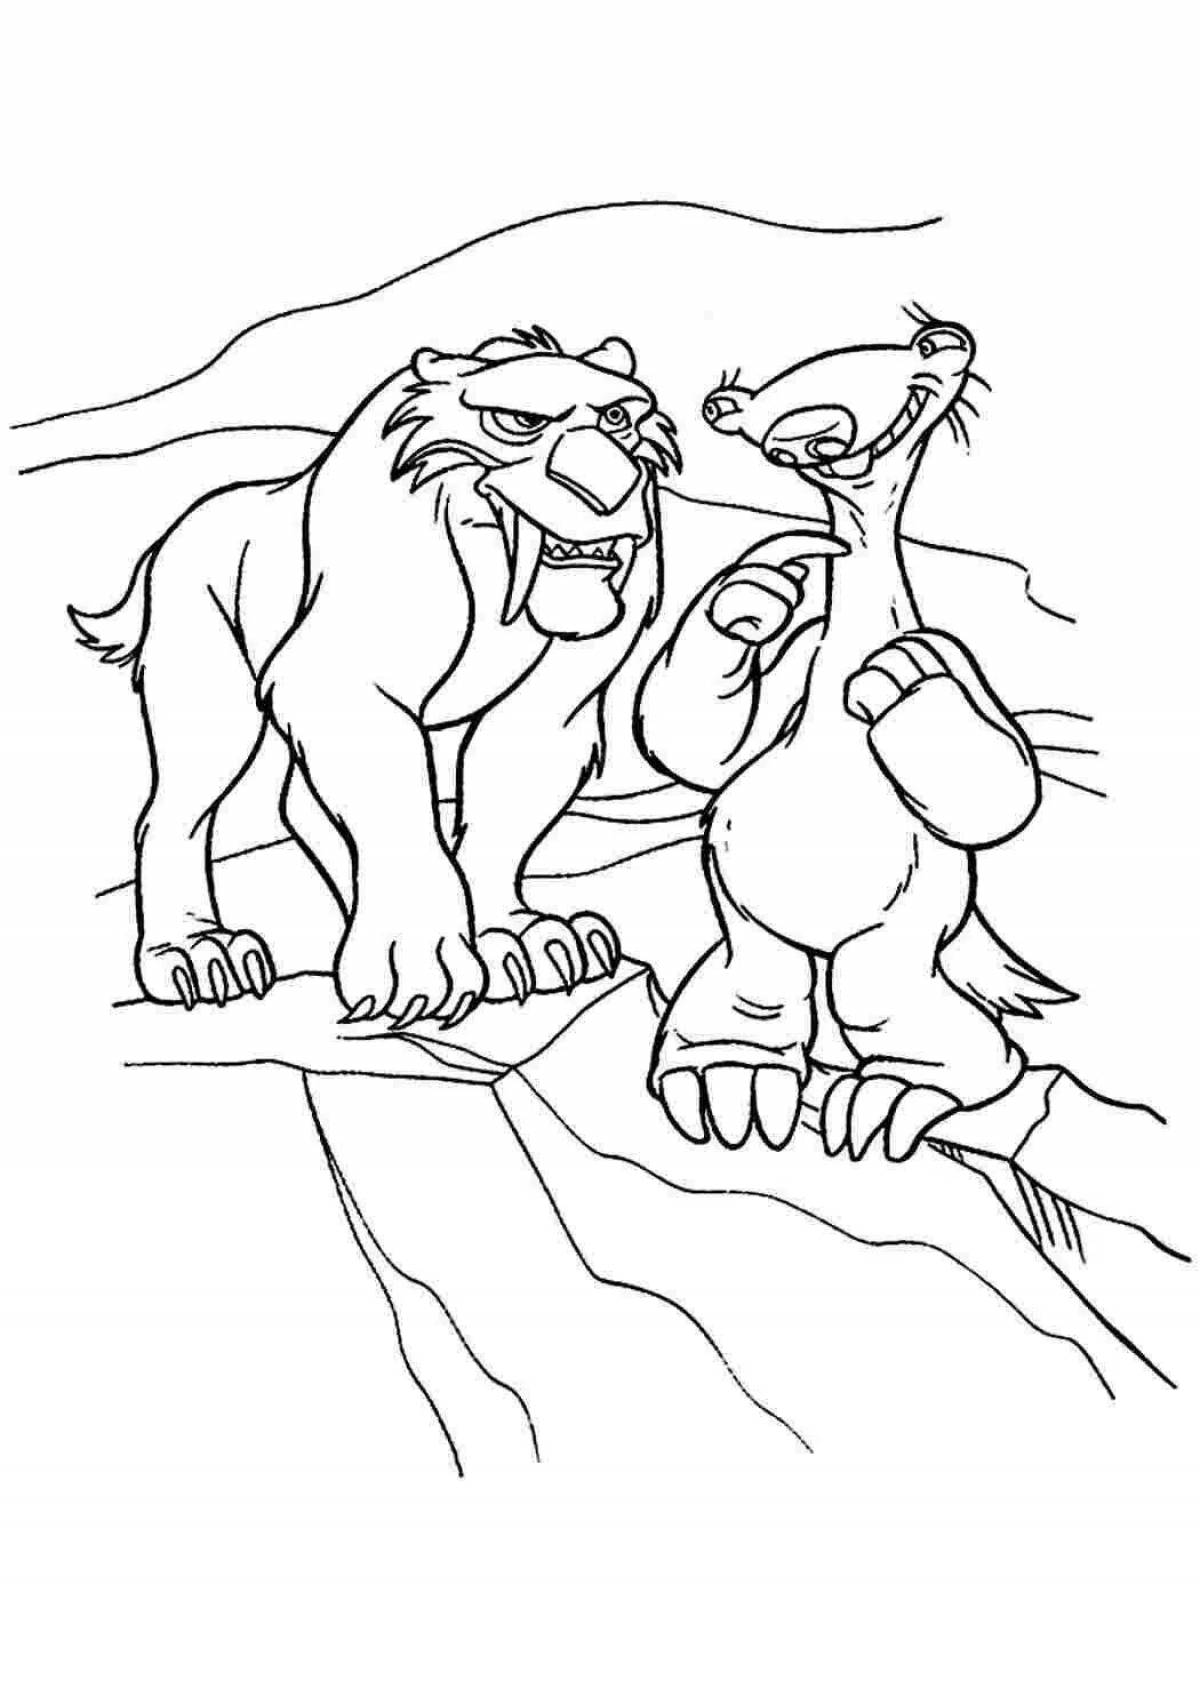 A fun coloring book for kids with a saber-toothed tiger